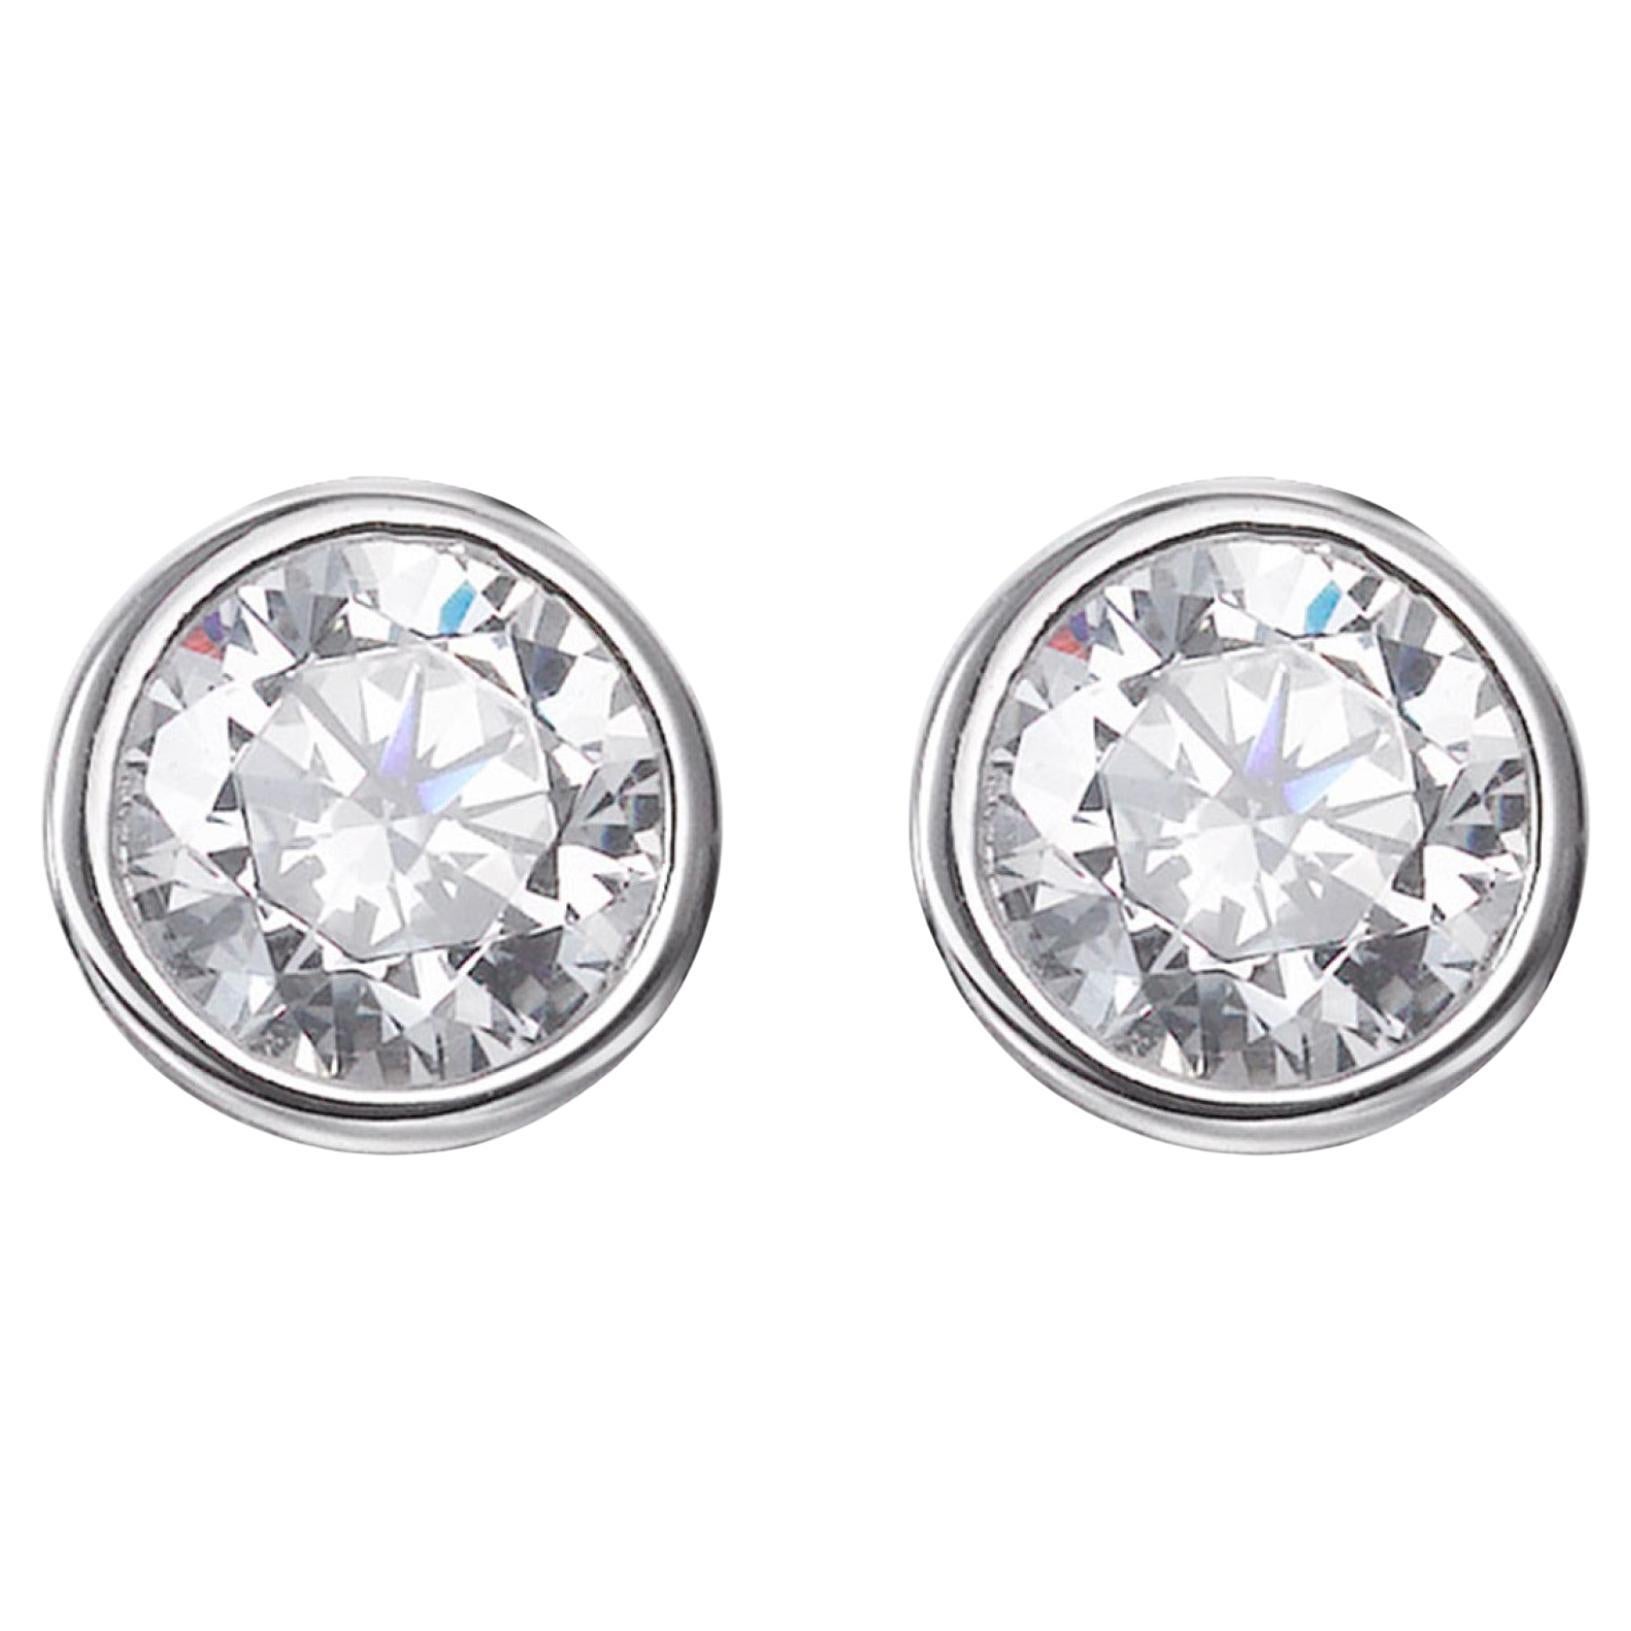 1.53ct Rub Over Set Cubic Zirconia Stud Earrings in Rhodium Plated Silver For Sale